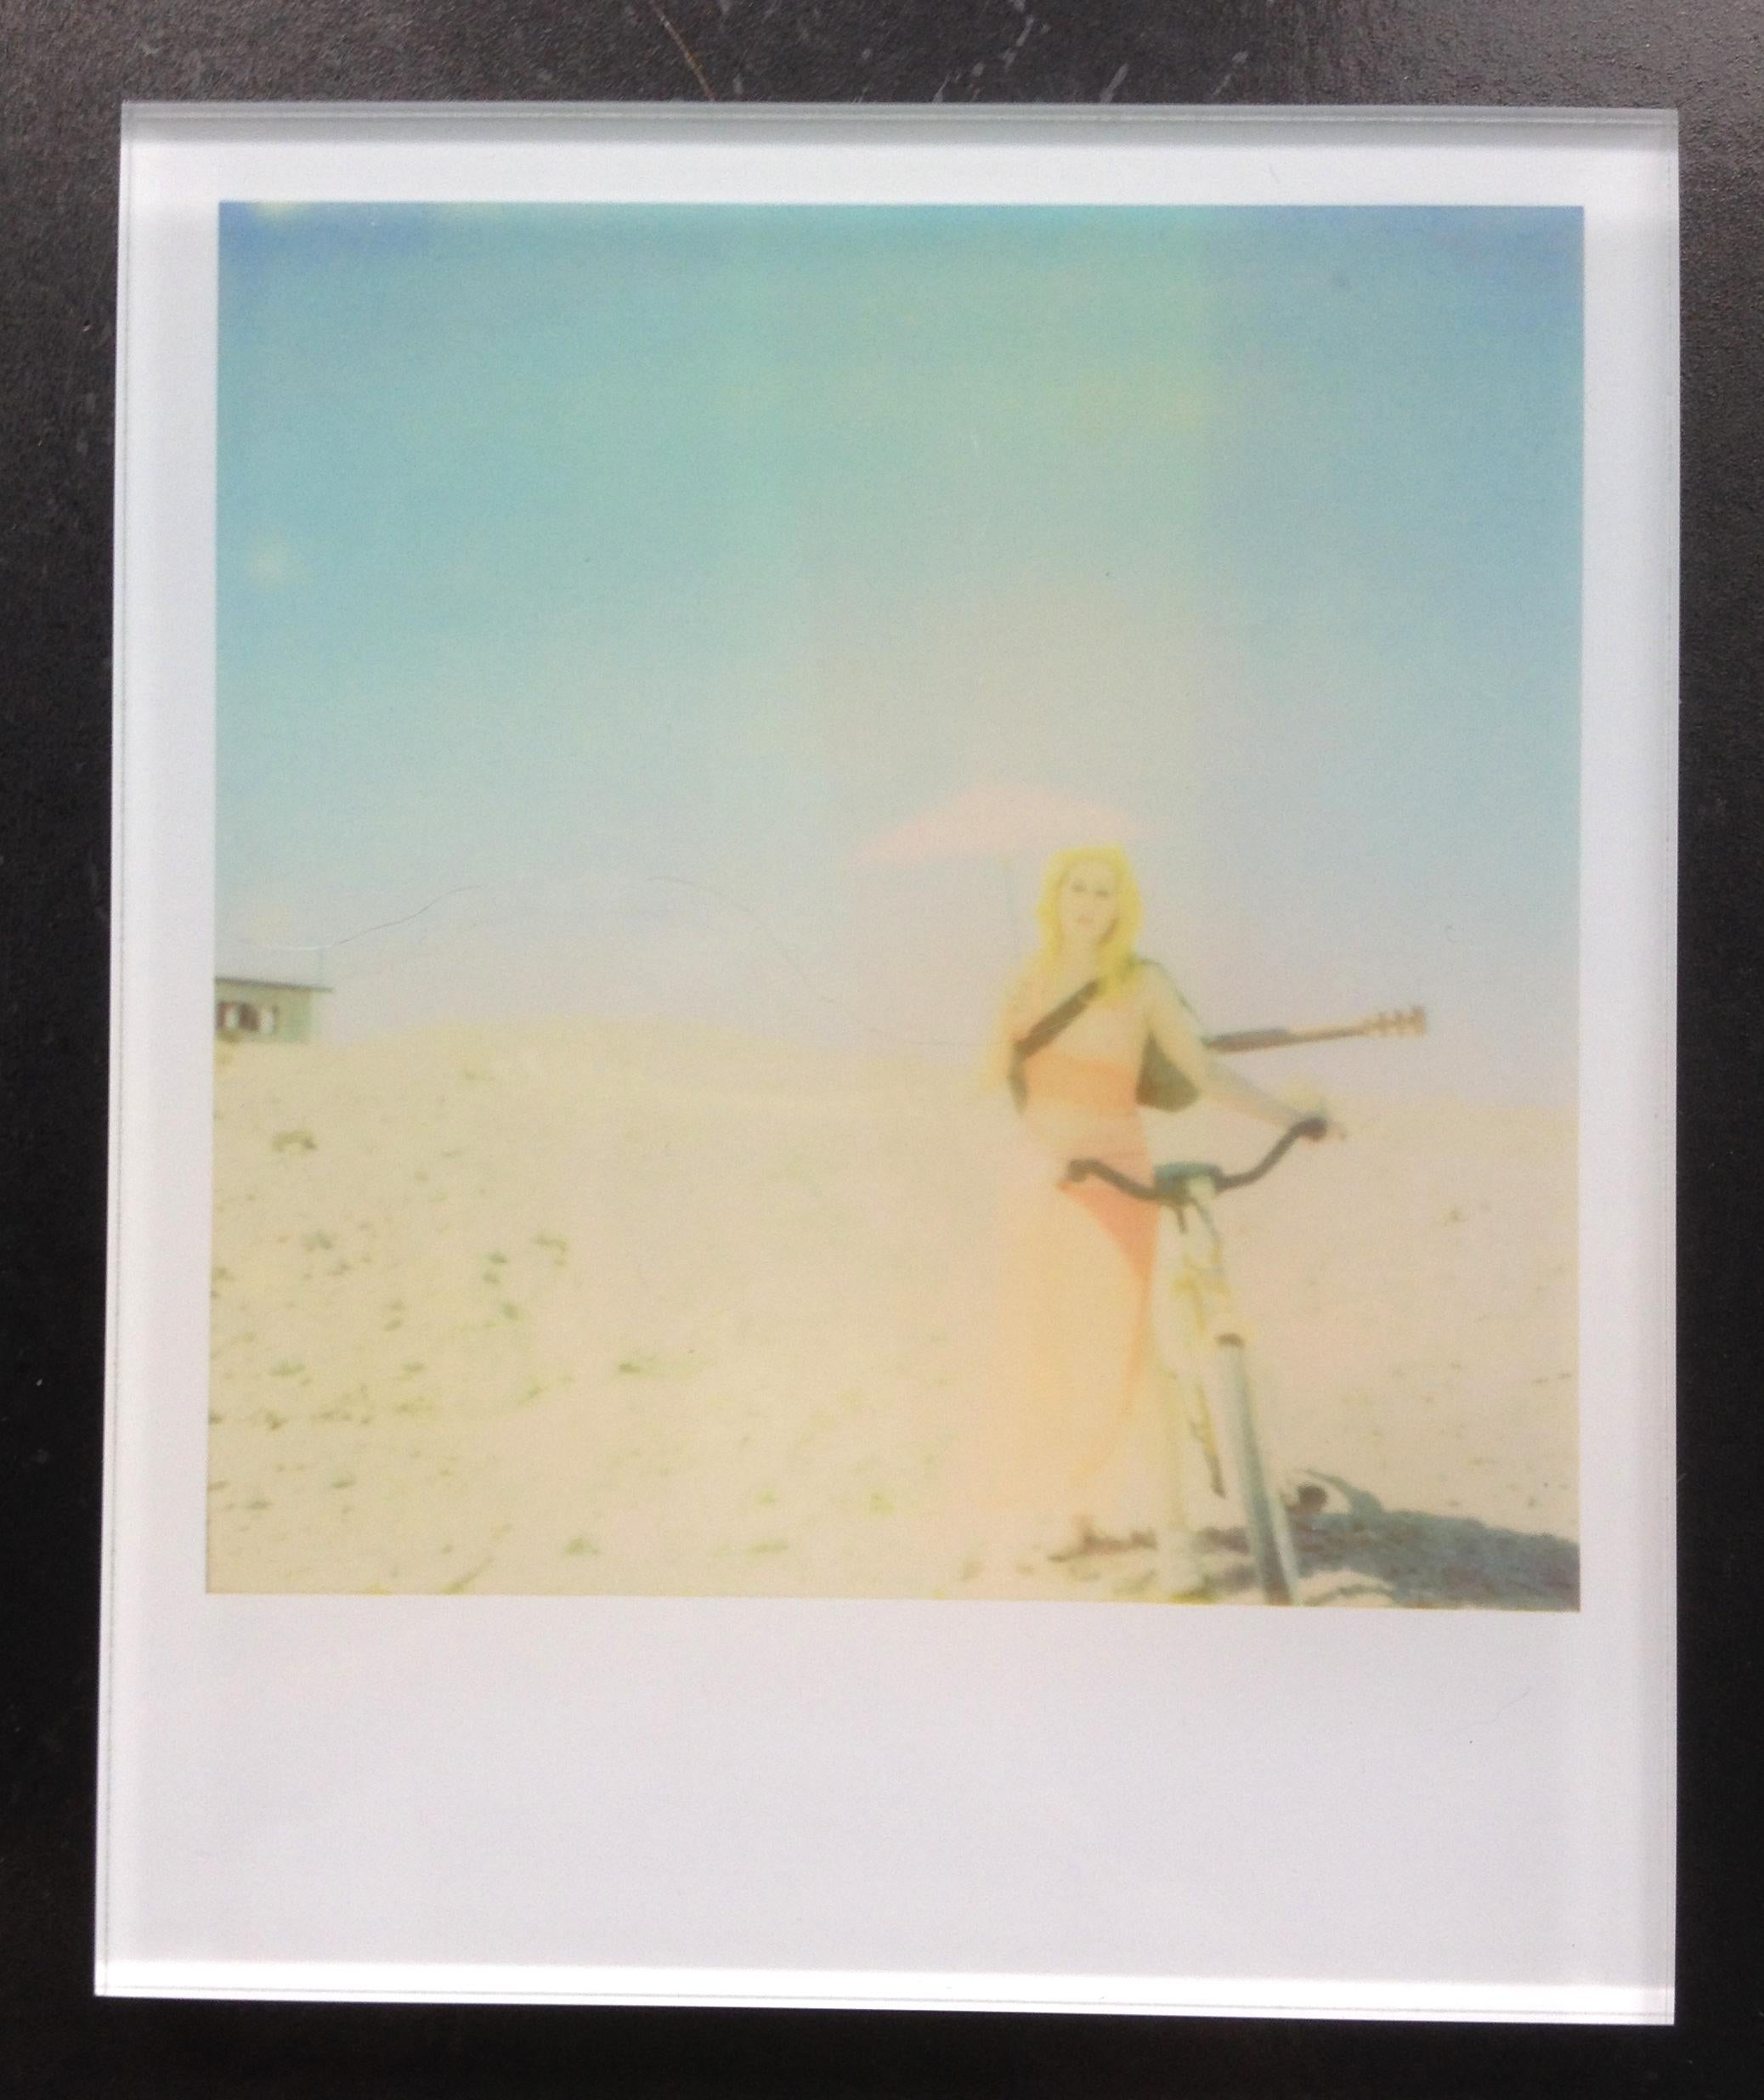 Stefanie Schneider's Minis
'Moonwalk' (29 Palms, CA), 2006
signed and signature brand on verso
Lambda digital Color Photographs based on a Polaroid

Polaroid sized open Editions 1999-2013
10.7 x 8.8cm (Image 7.9x7.7cm)
mounted: sandwiched in between